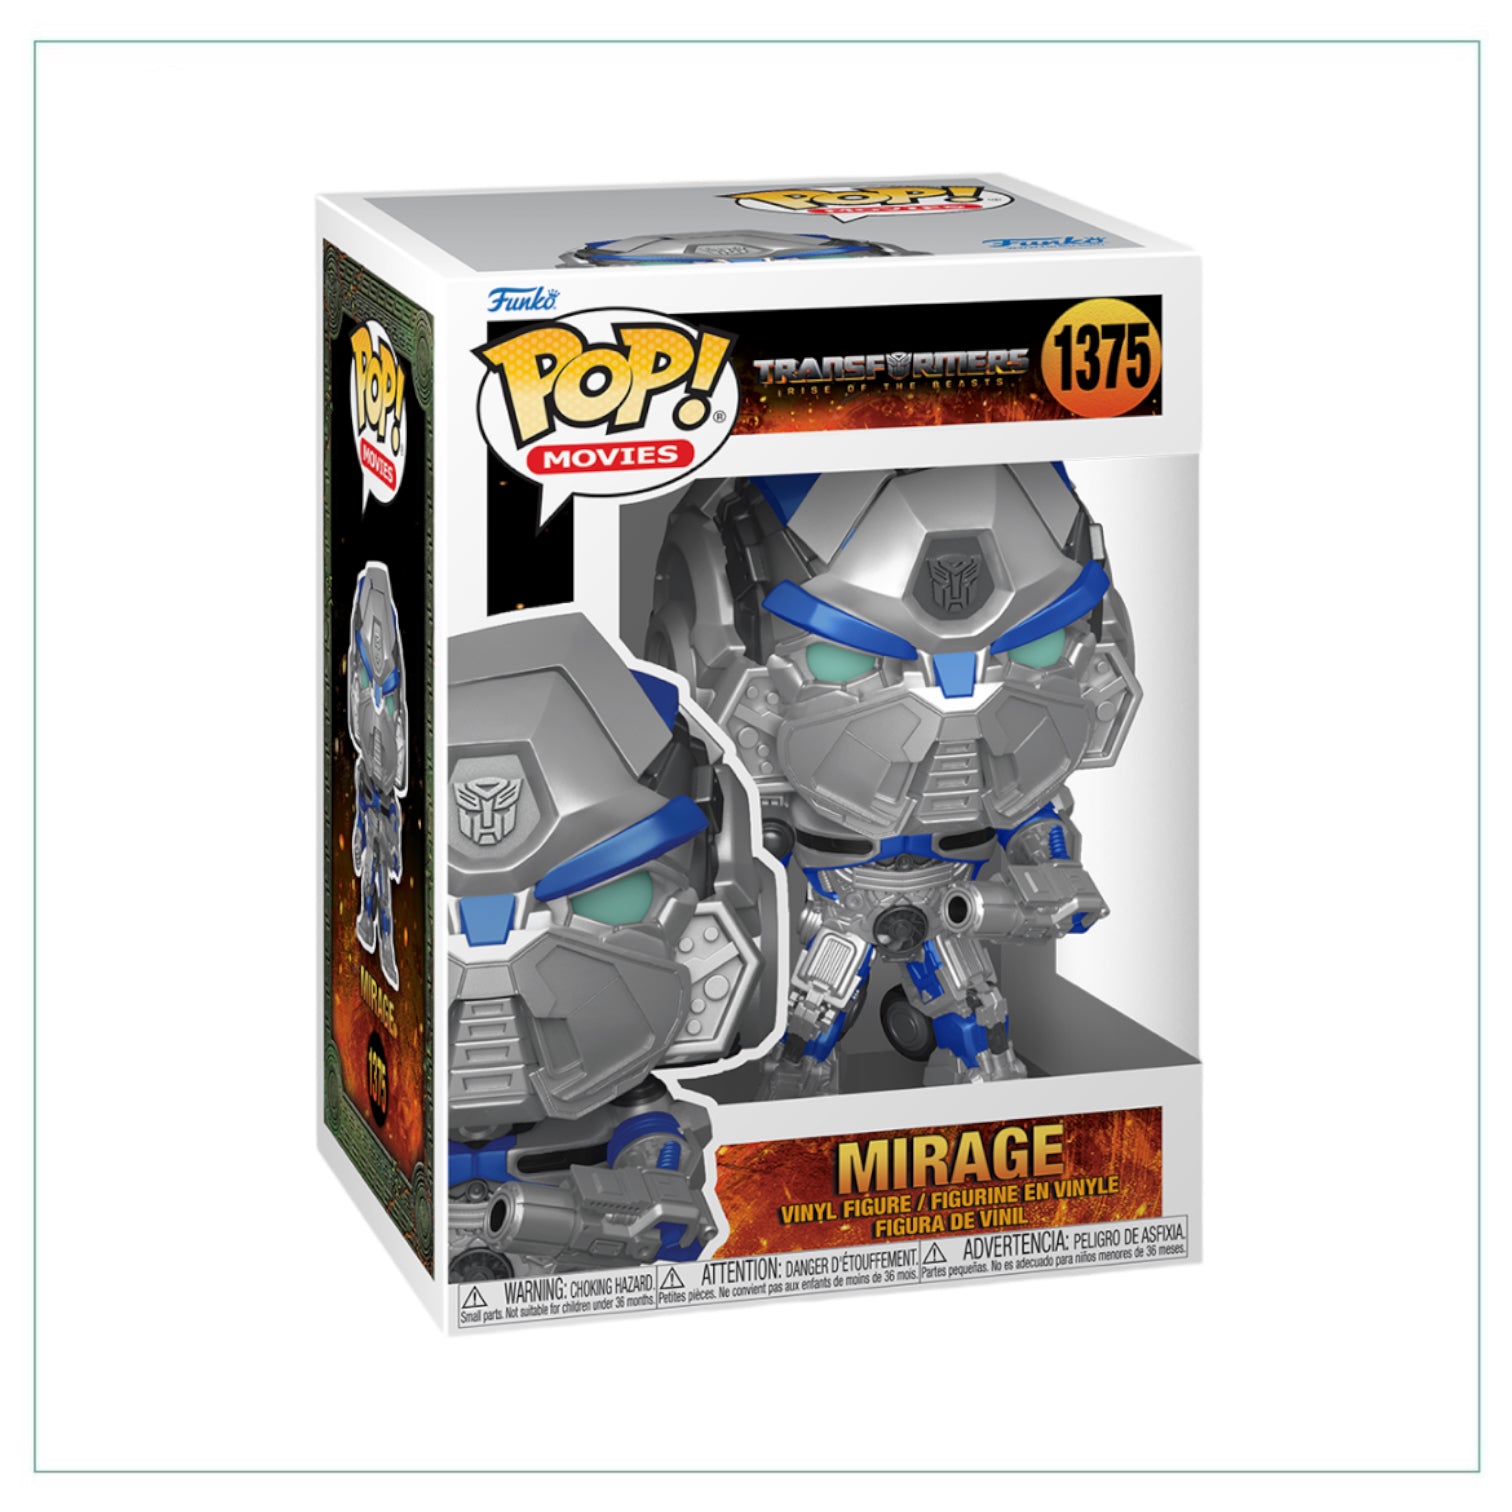 Mirage #1375 Funko Pop! Transformers Rise of the Beasts